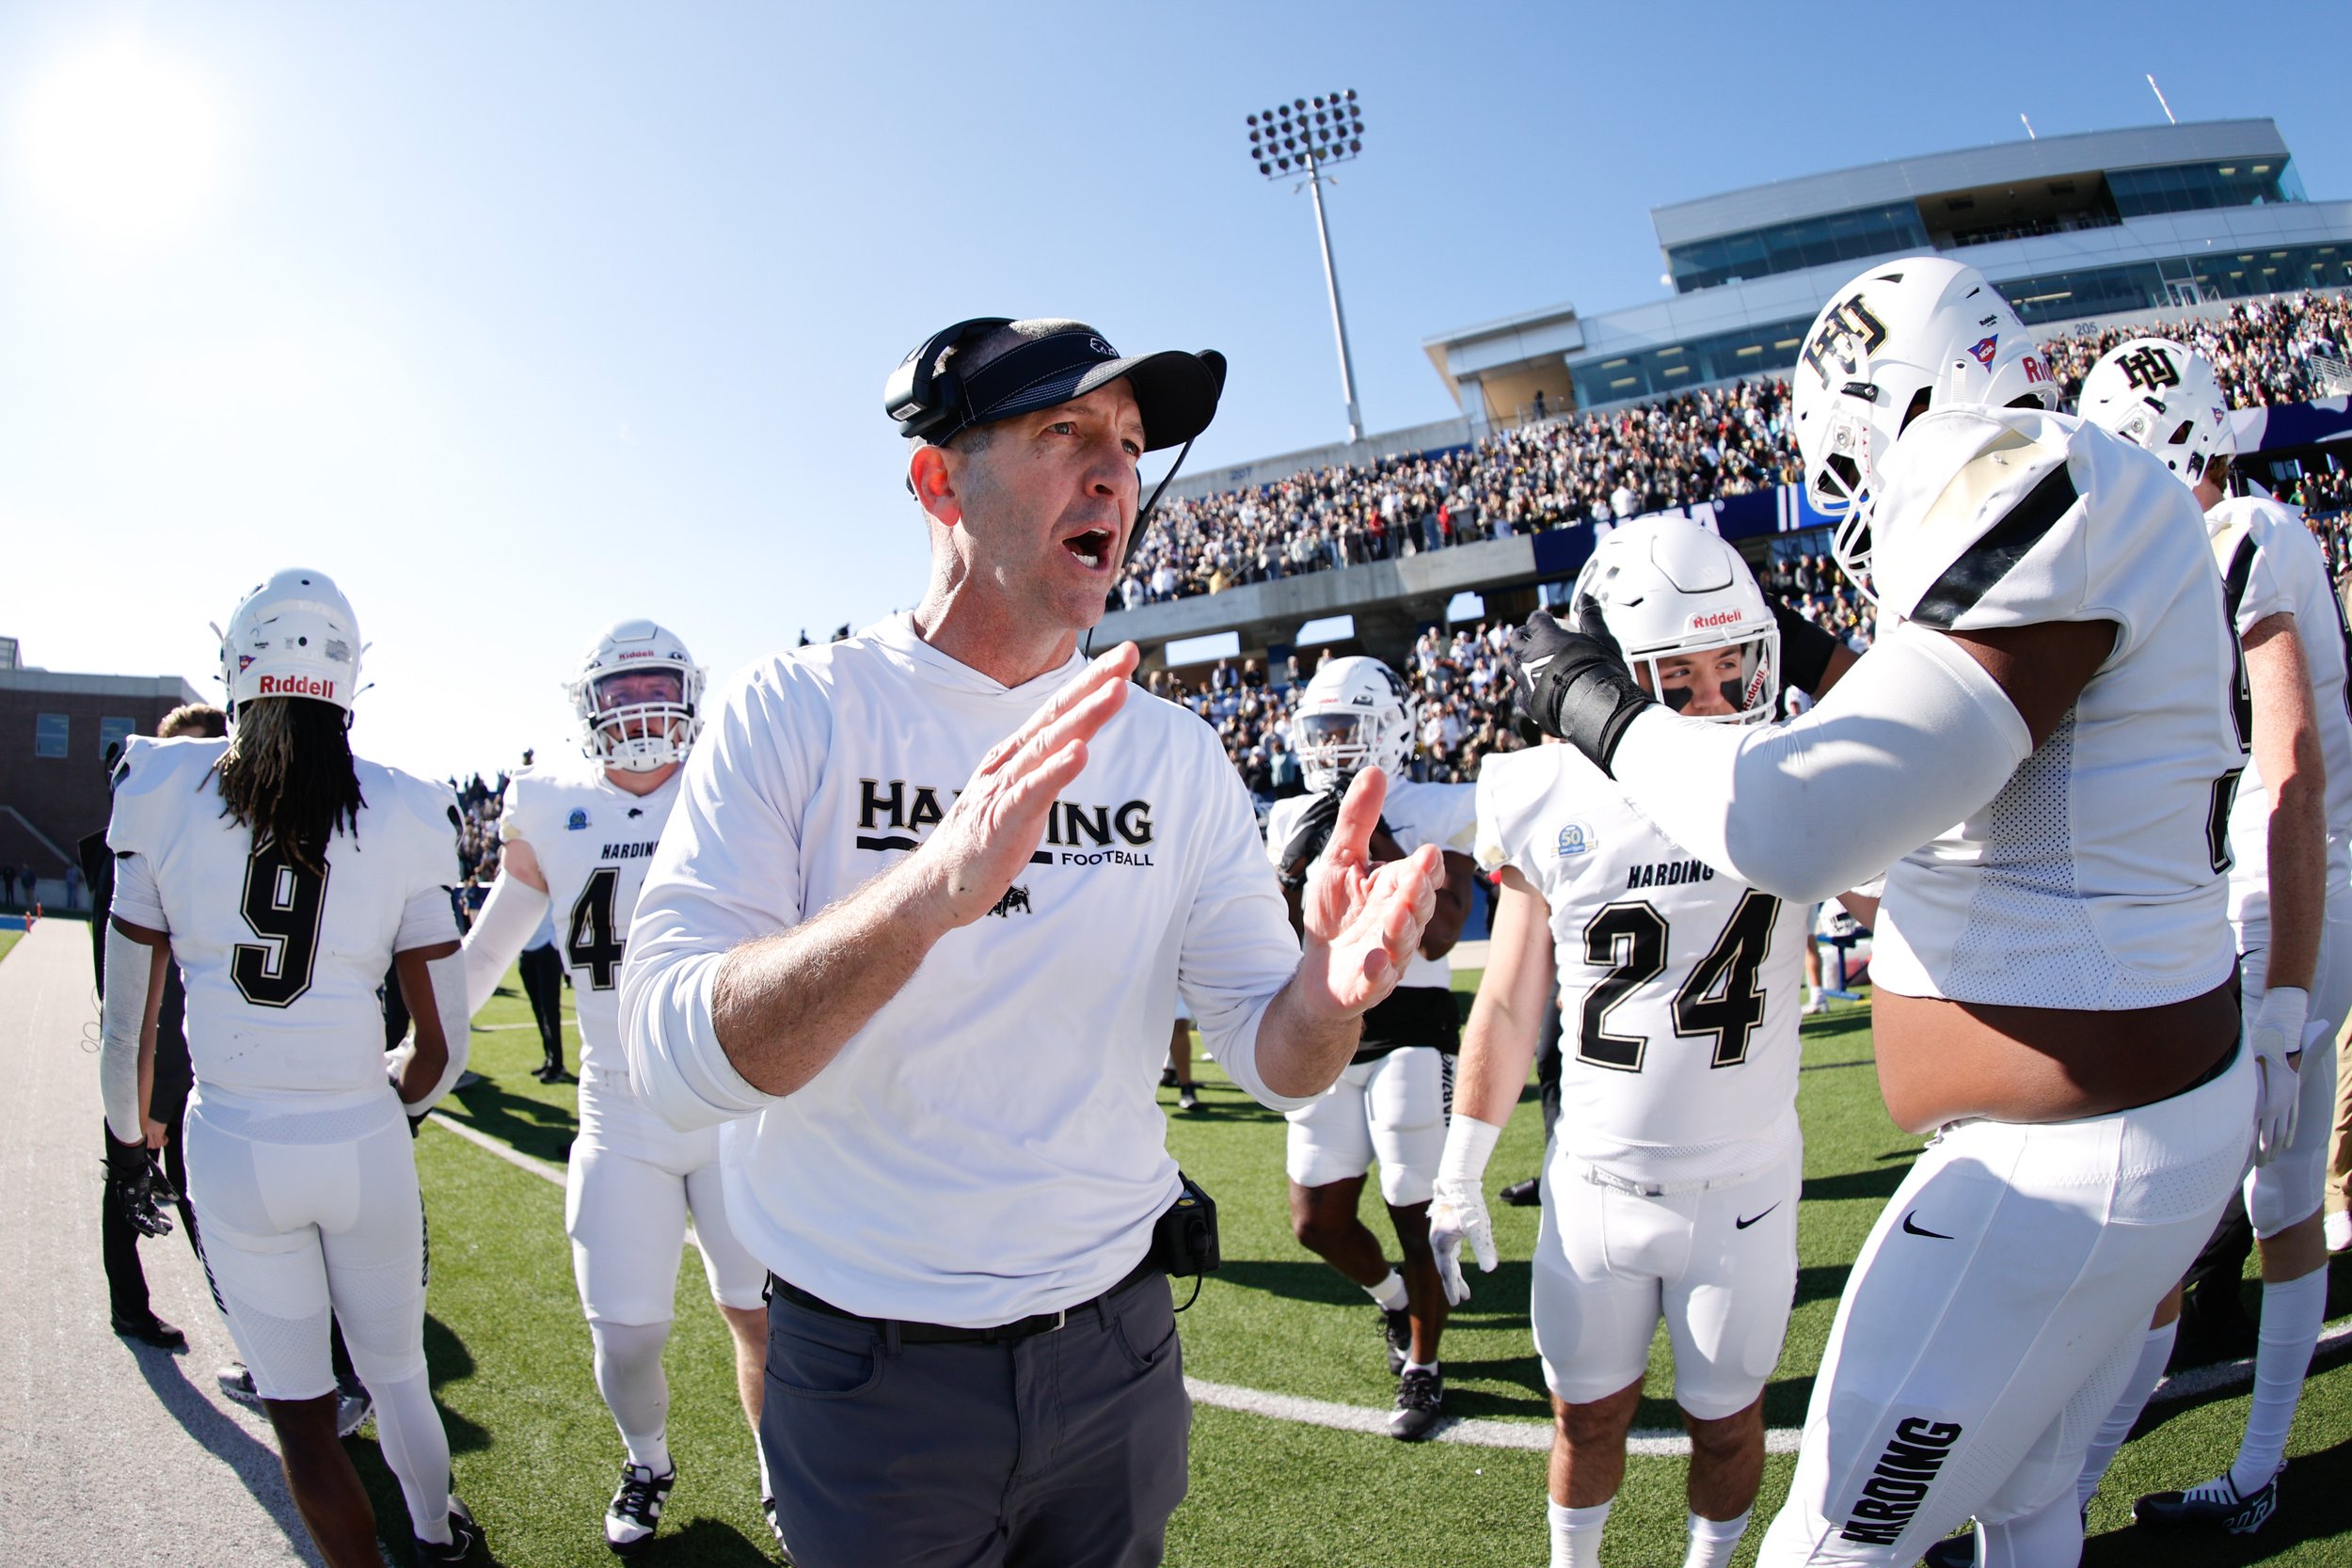  MCKINNEY, TEXAS - DECEMBER 16: EDITORS NOTE: image has been taken with a fisheye lens) Head coach Paul Simmons of Harding Bisons reacts before kick off against the Colorado School of Mines Orediggers during the Division II Football Championship held